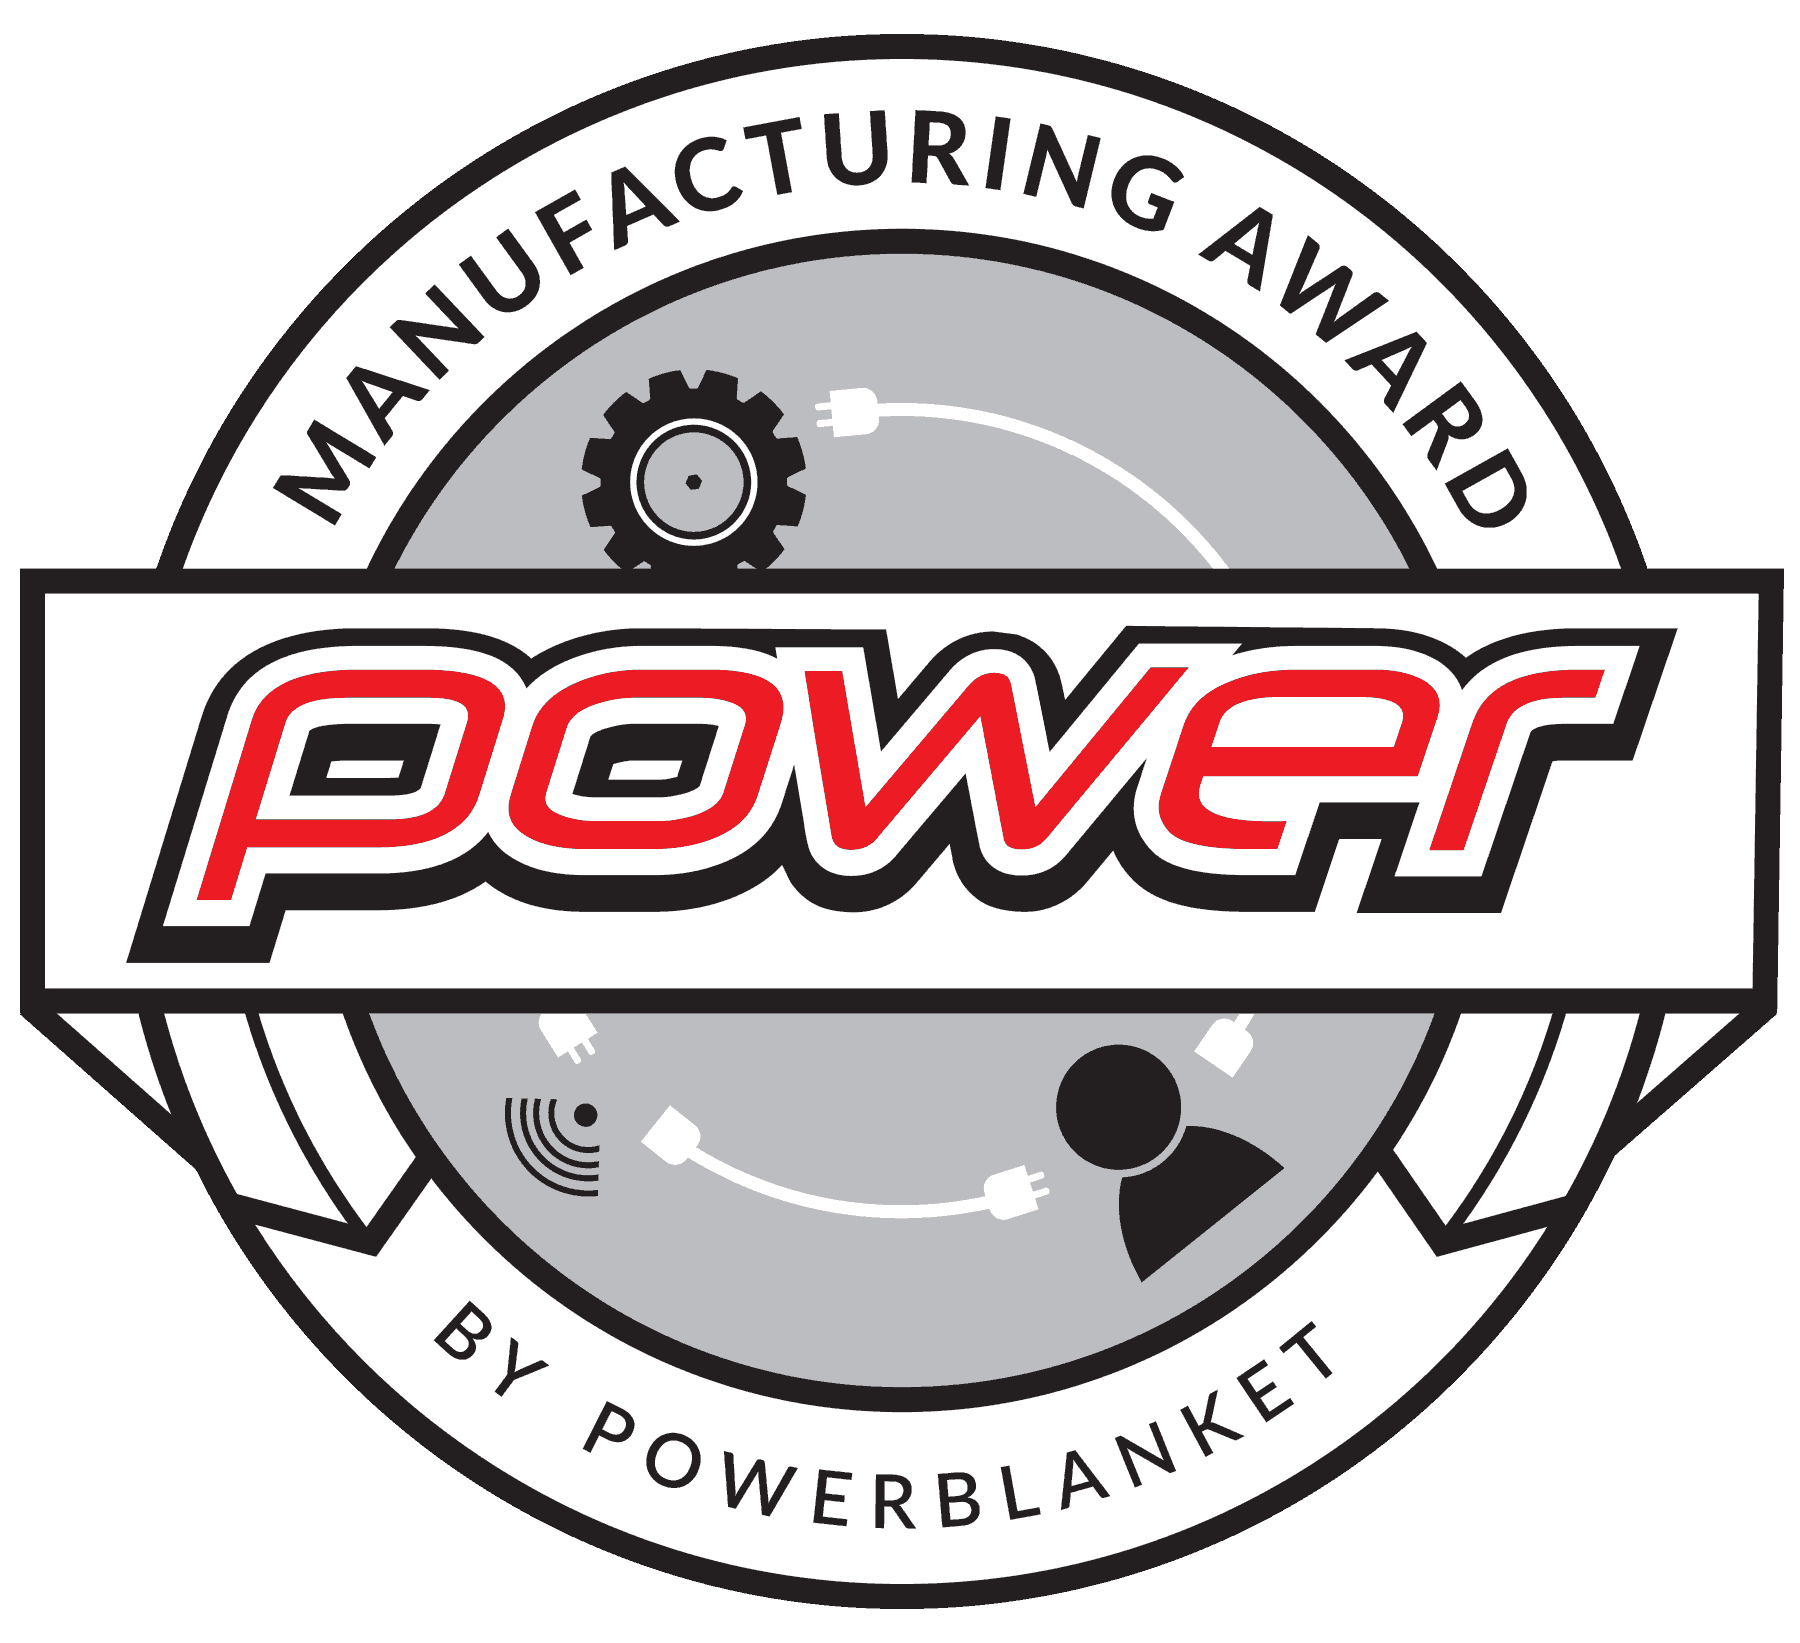 March Power Manufacturing Award Winner: Cal-Pack